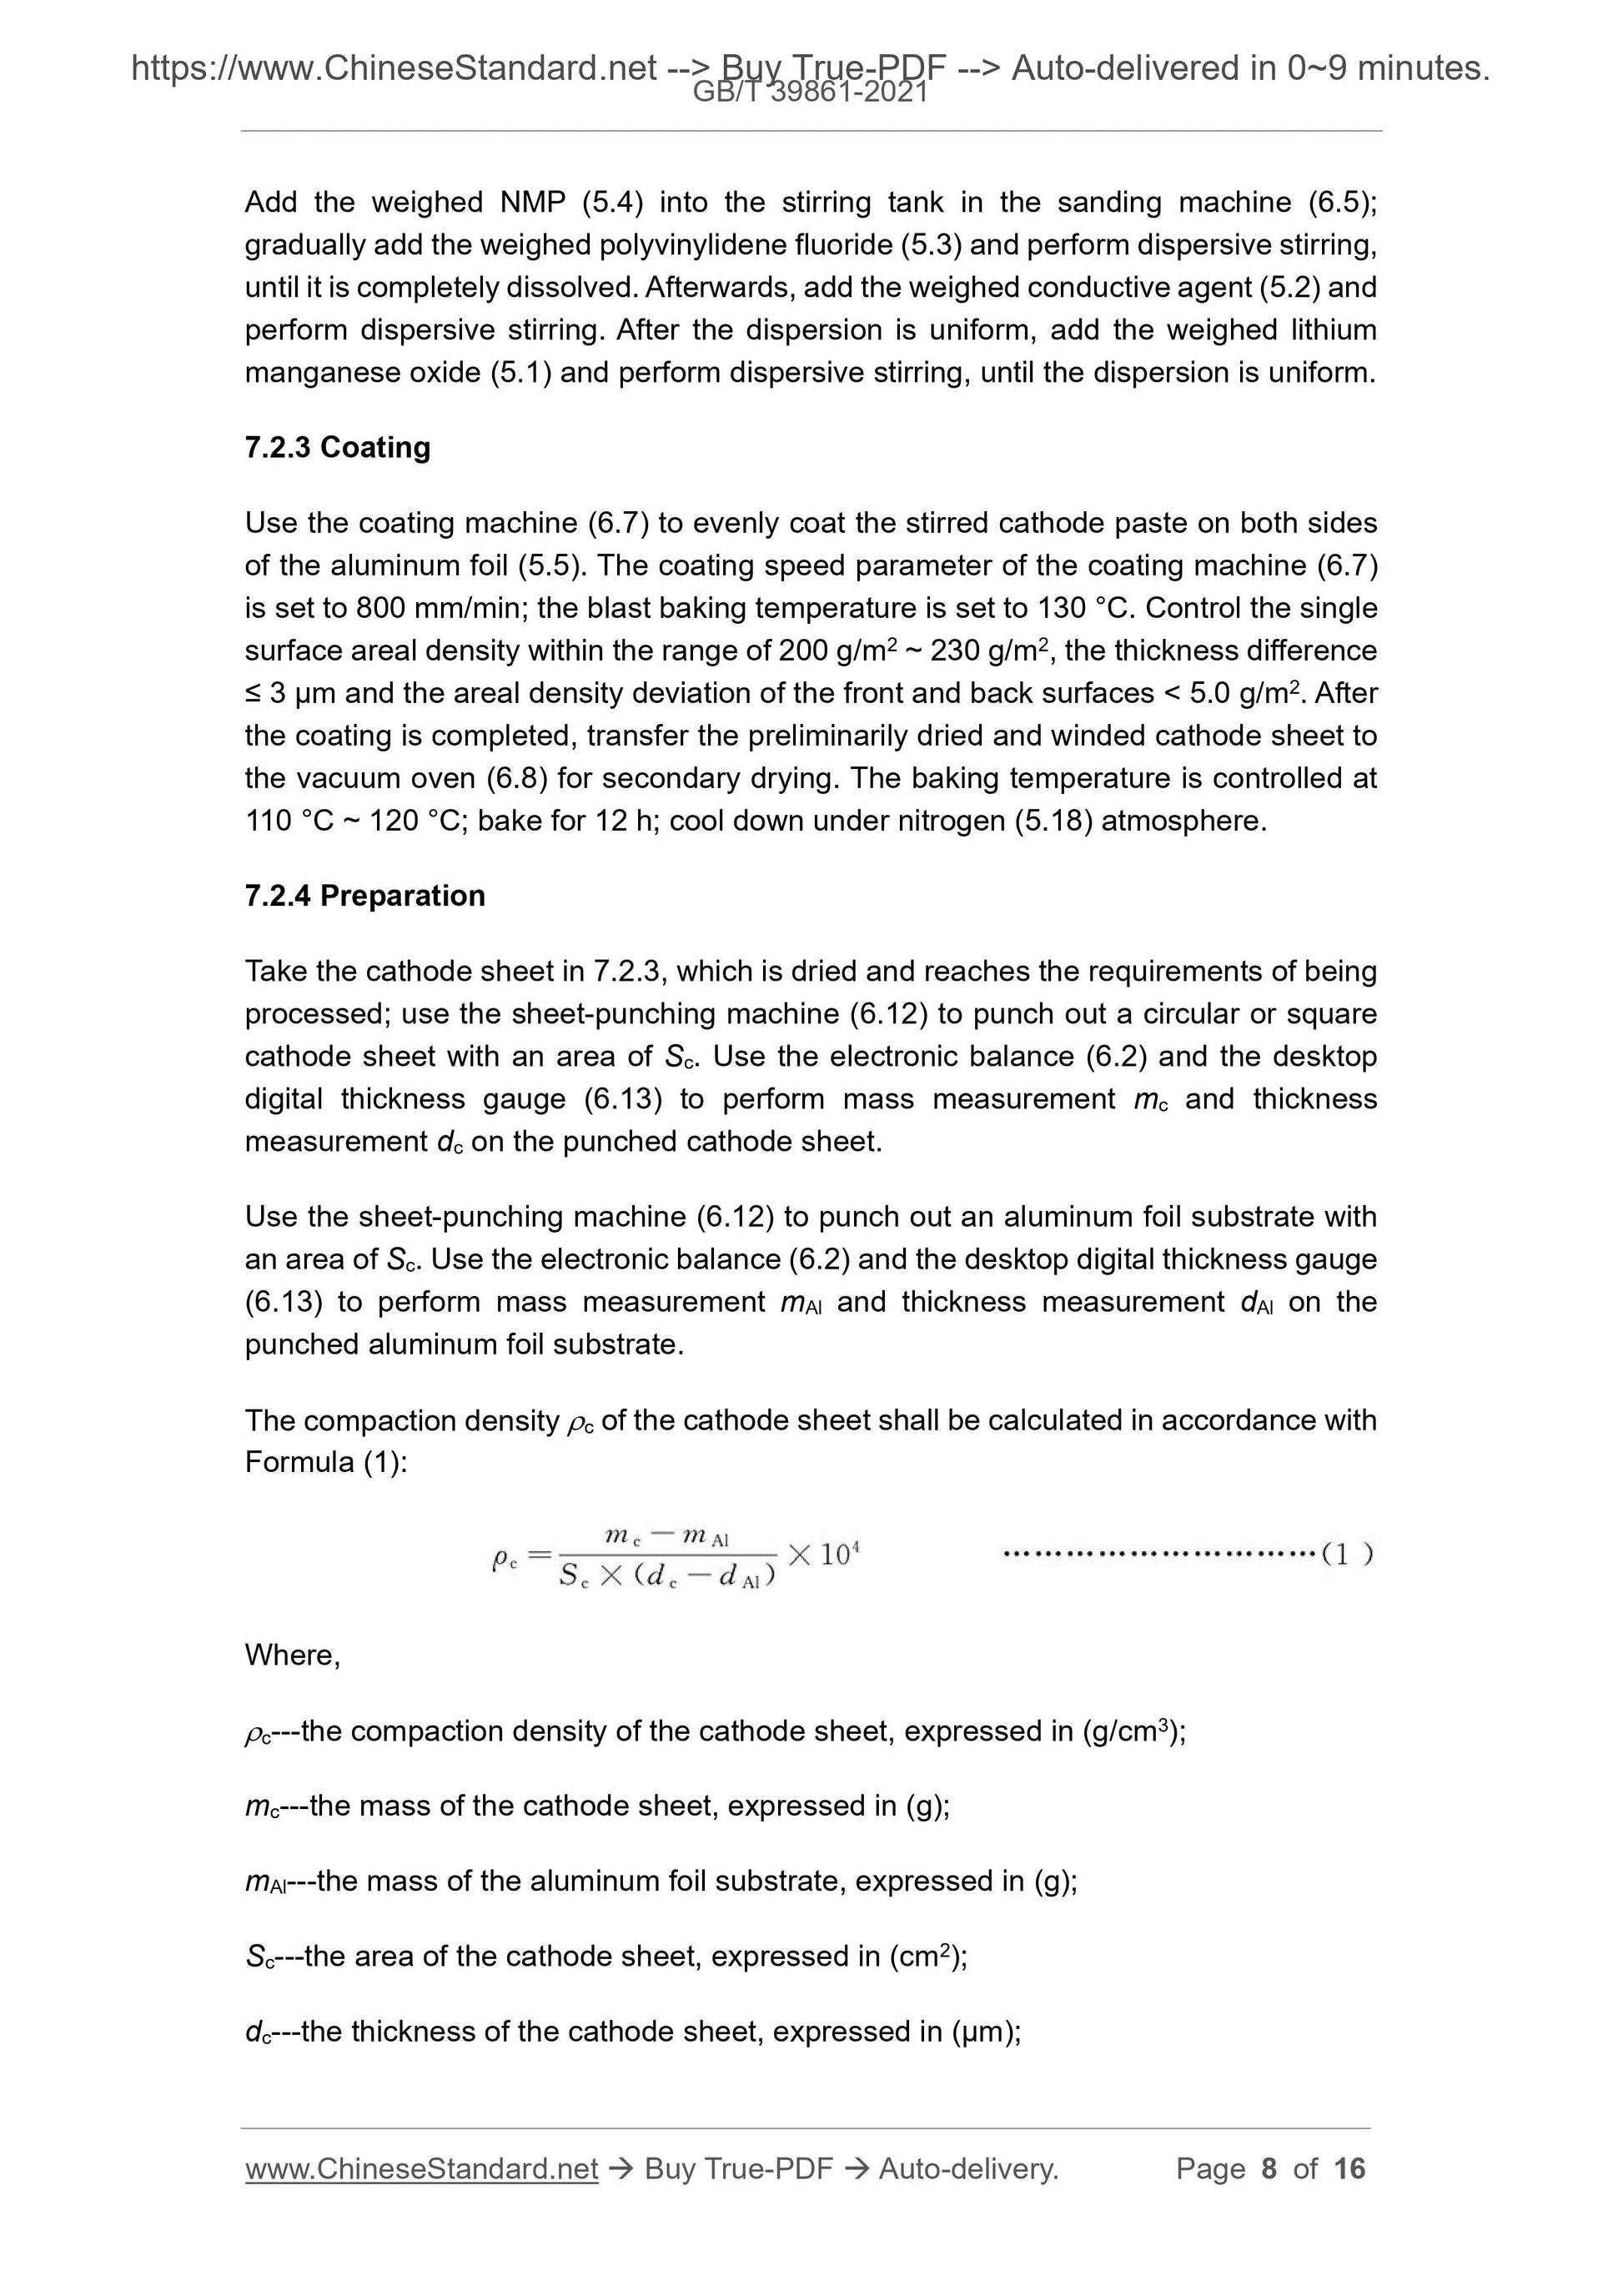 GB/T 39861-2021 Page 5